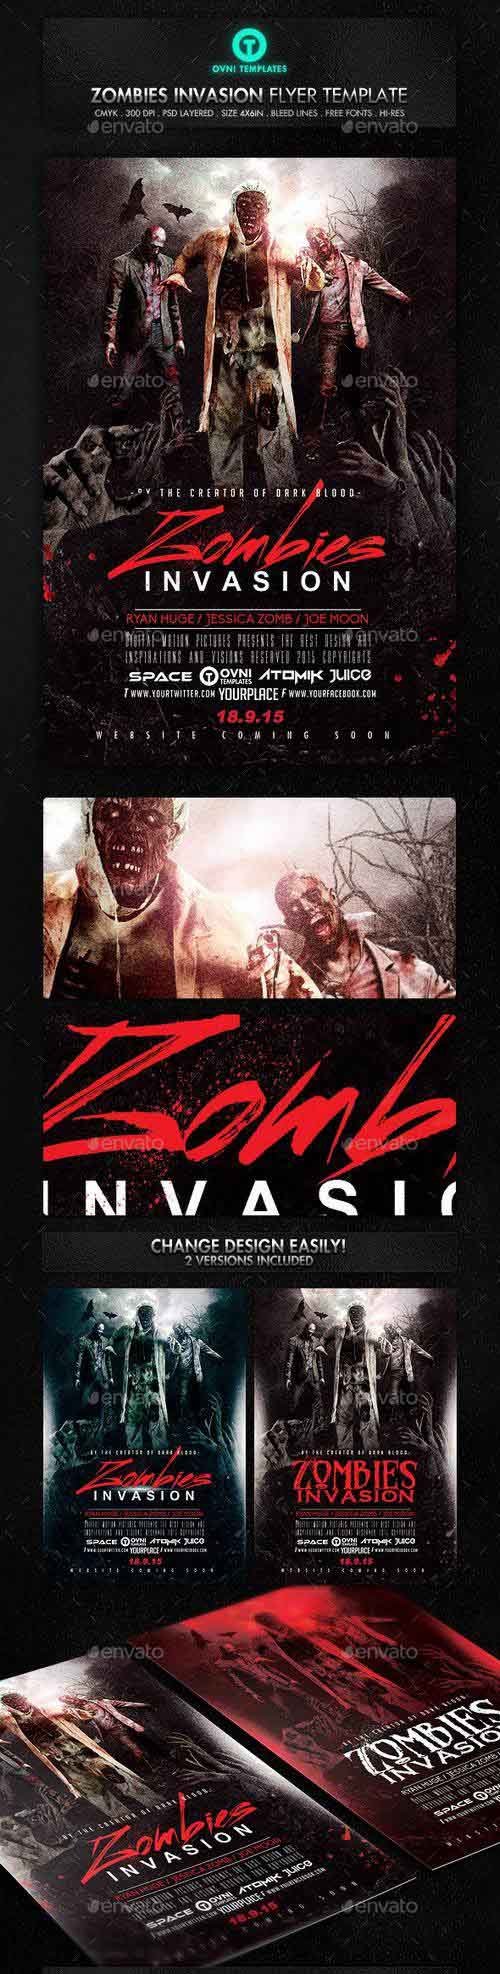 Zombies Dead Invastion Flyer Template 13181480